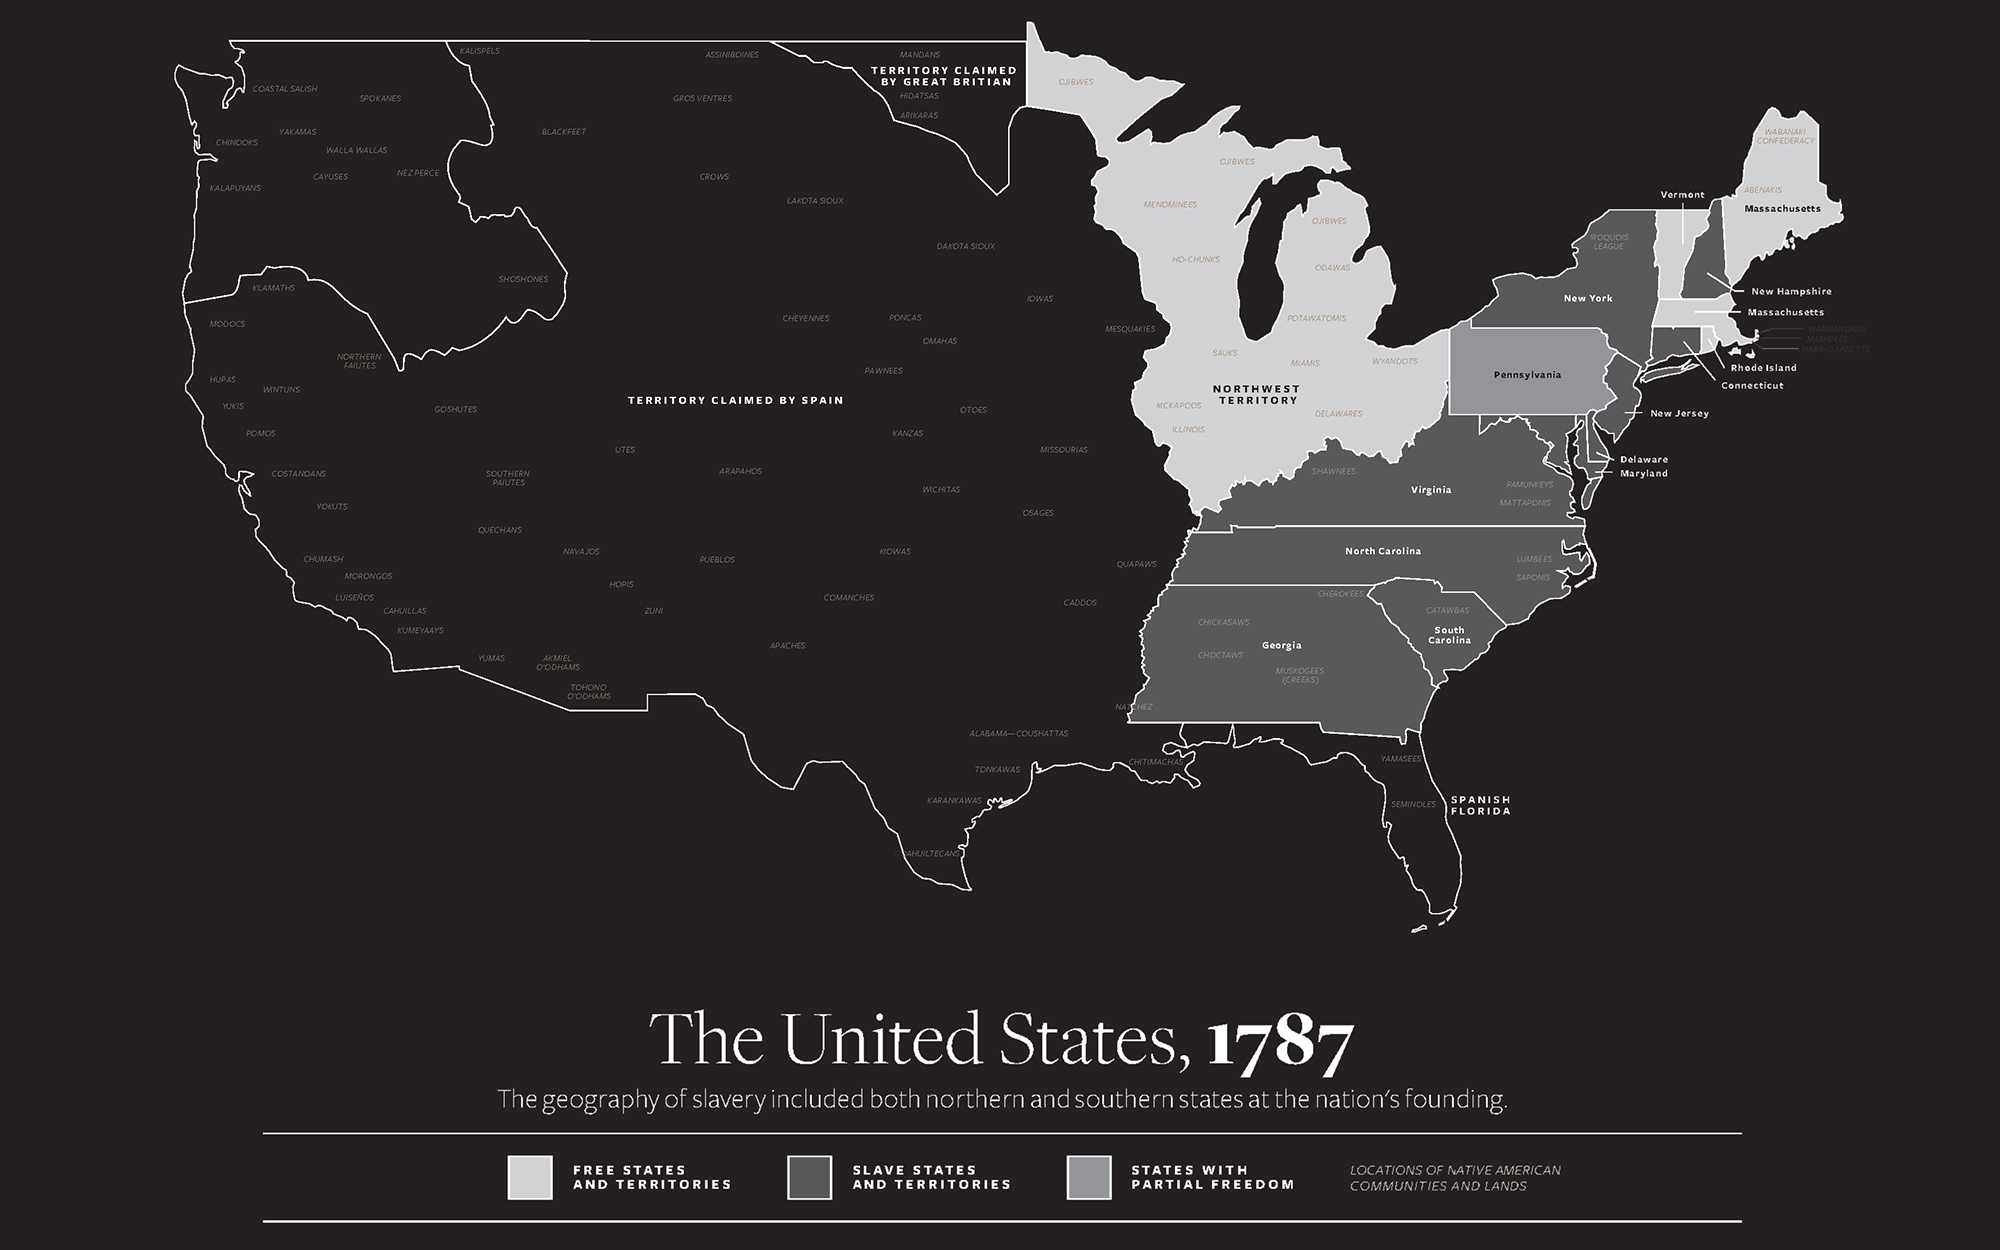 The United States, 1787